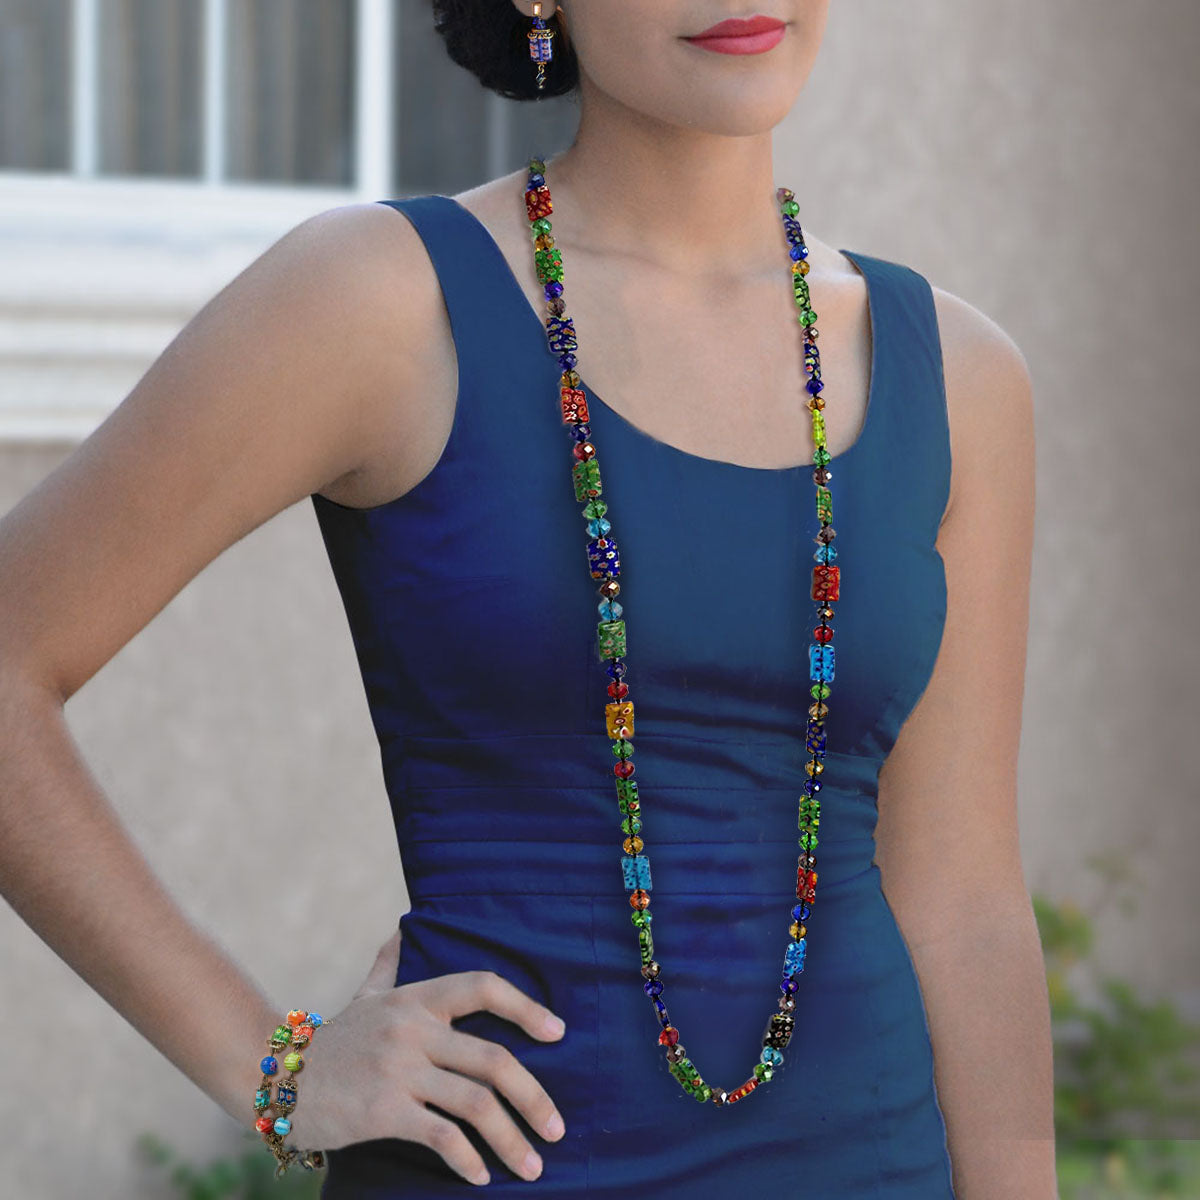 Millefiori Glass Disks Knotted Beads Necklace - Fashion Basics